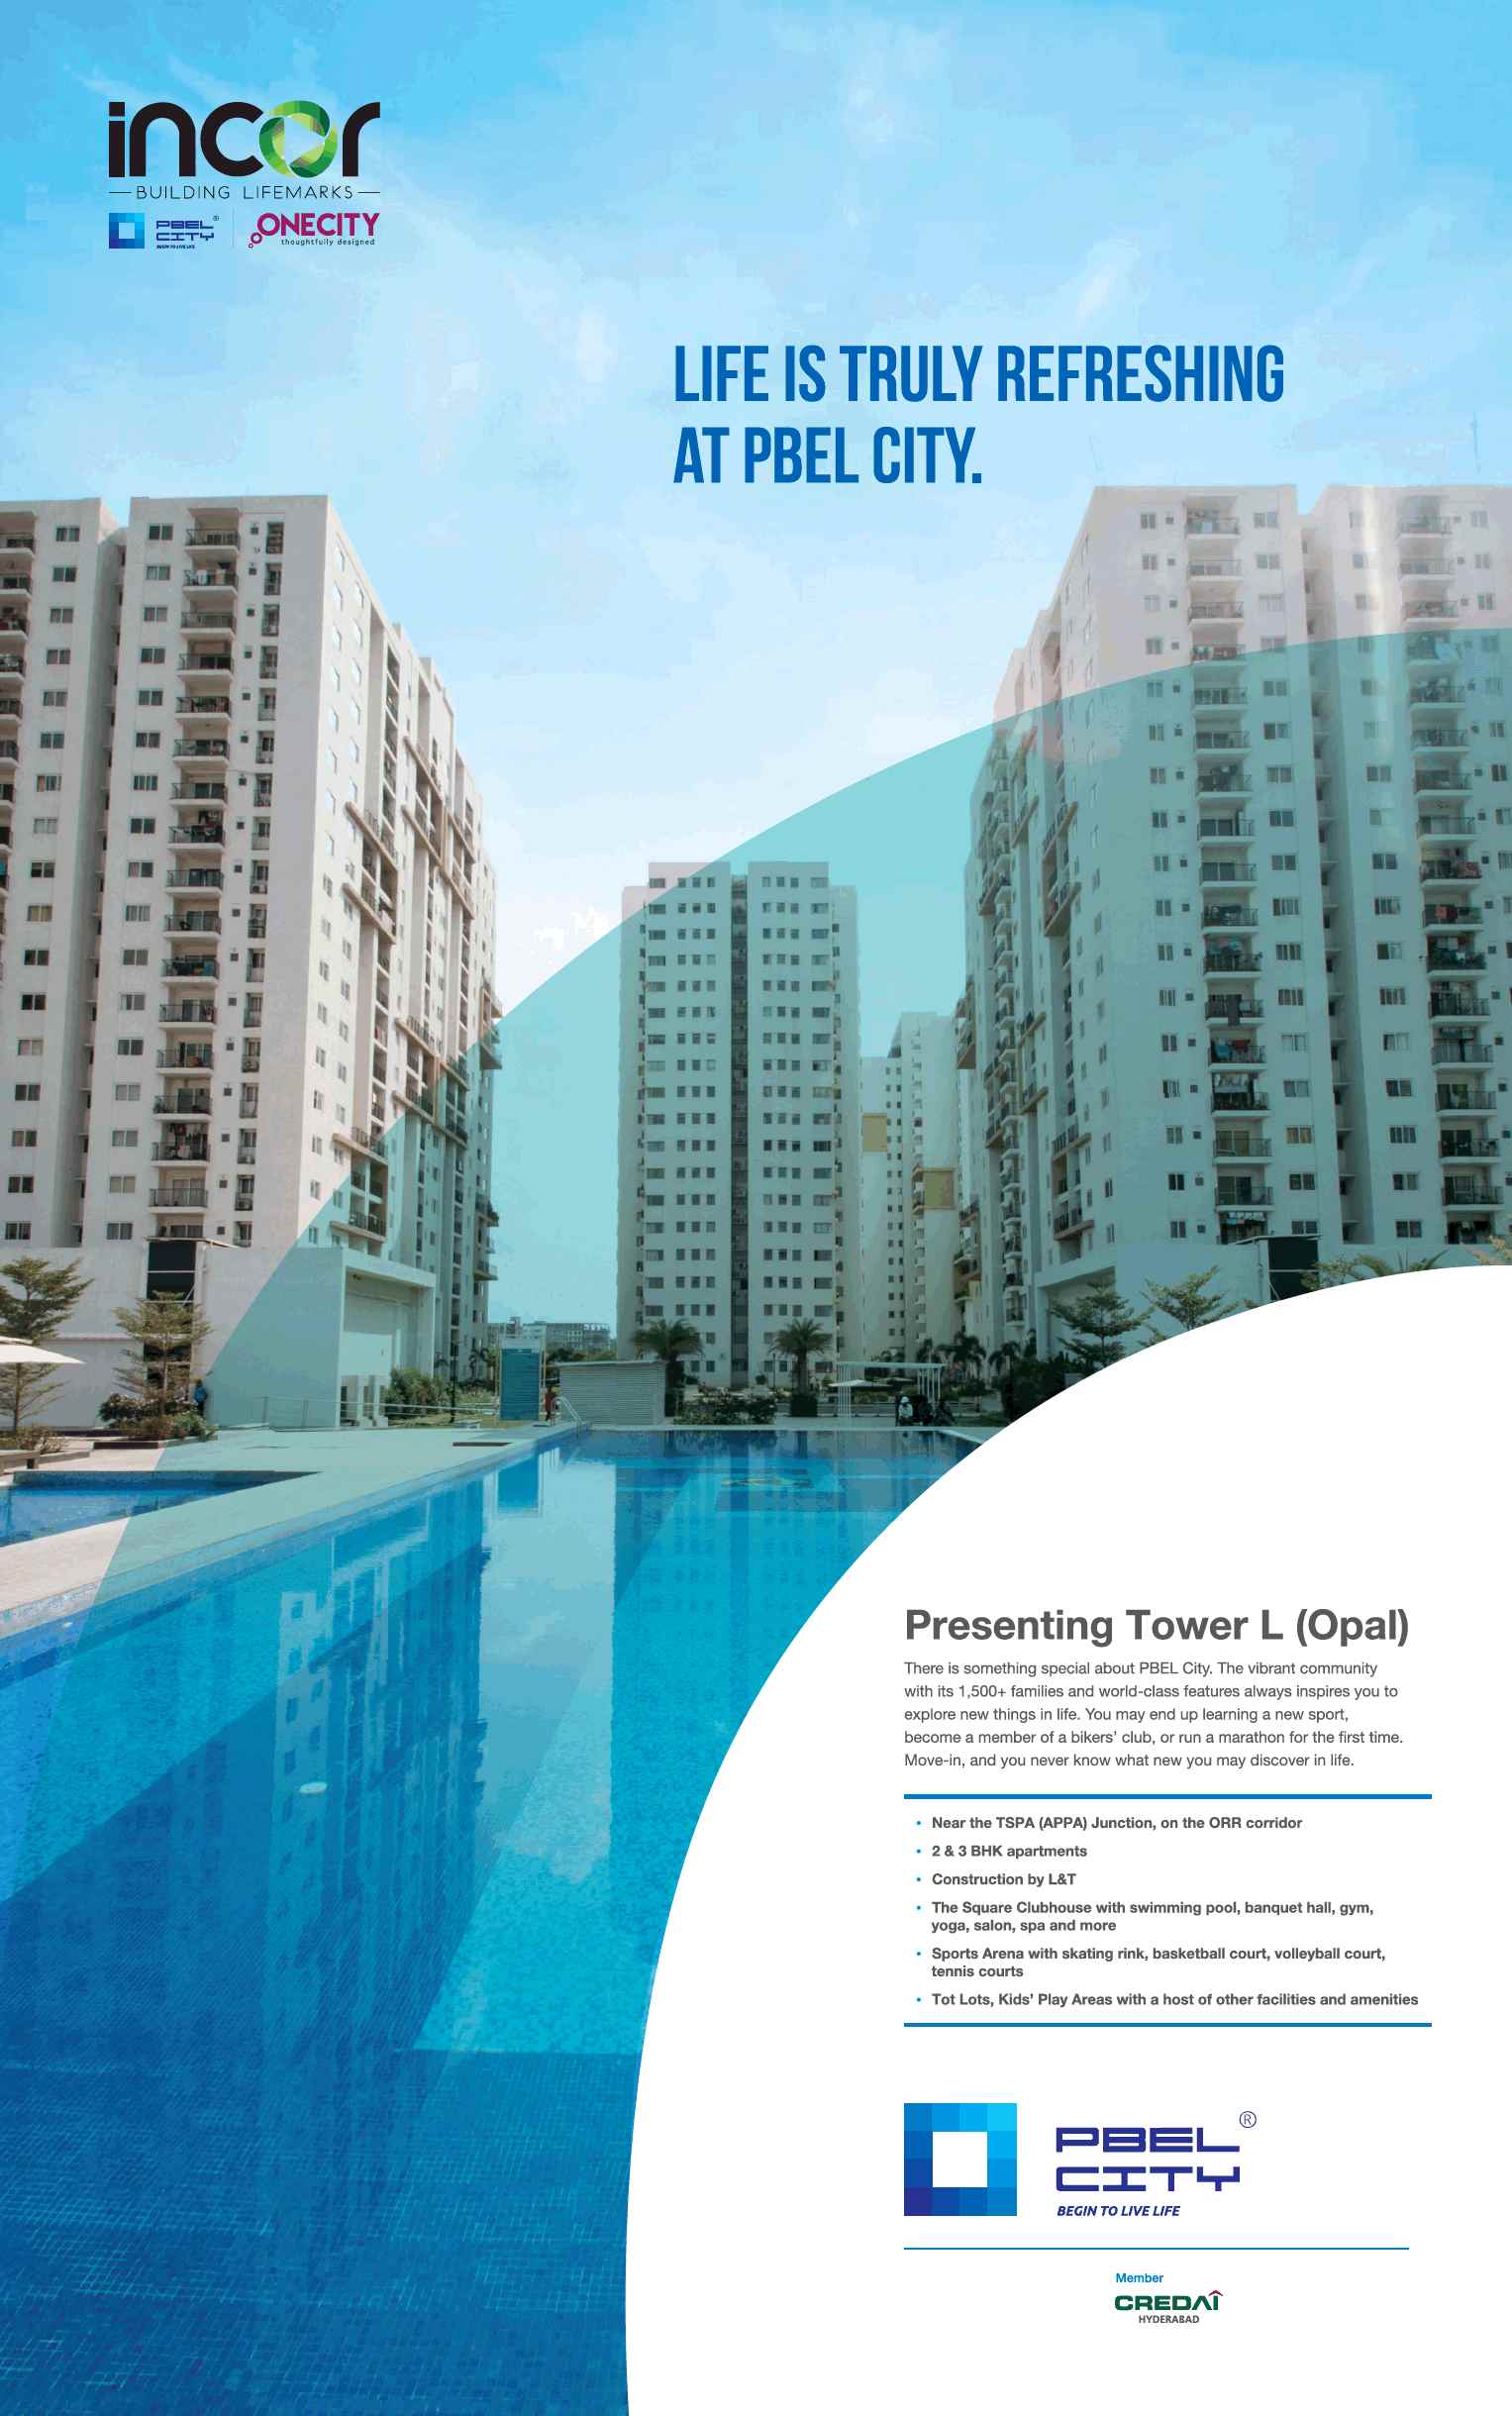 Presenting Tower L (Opal) at PBEL City in Hyderabad Update